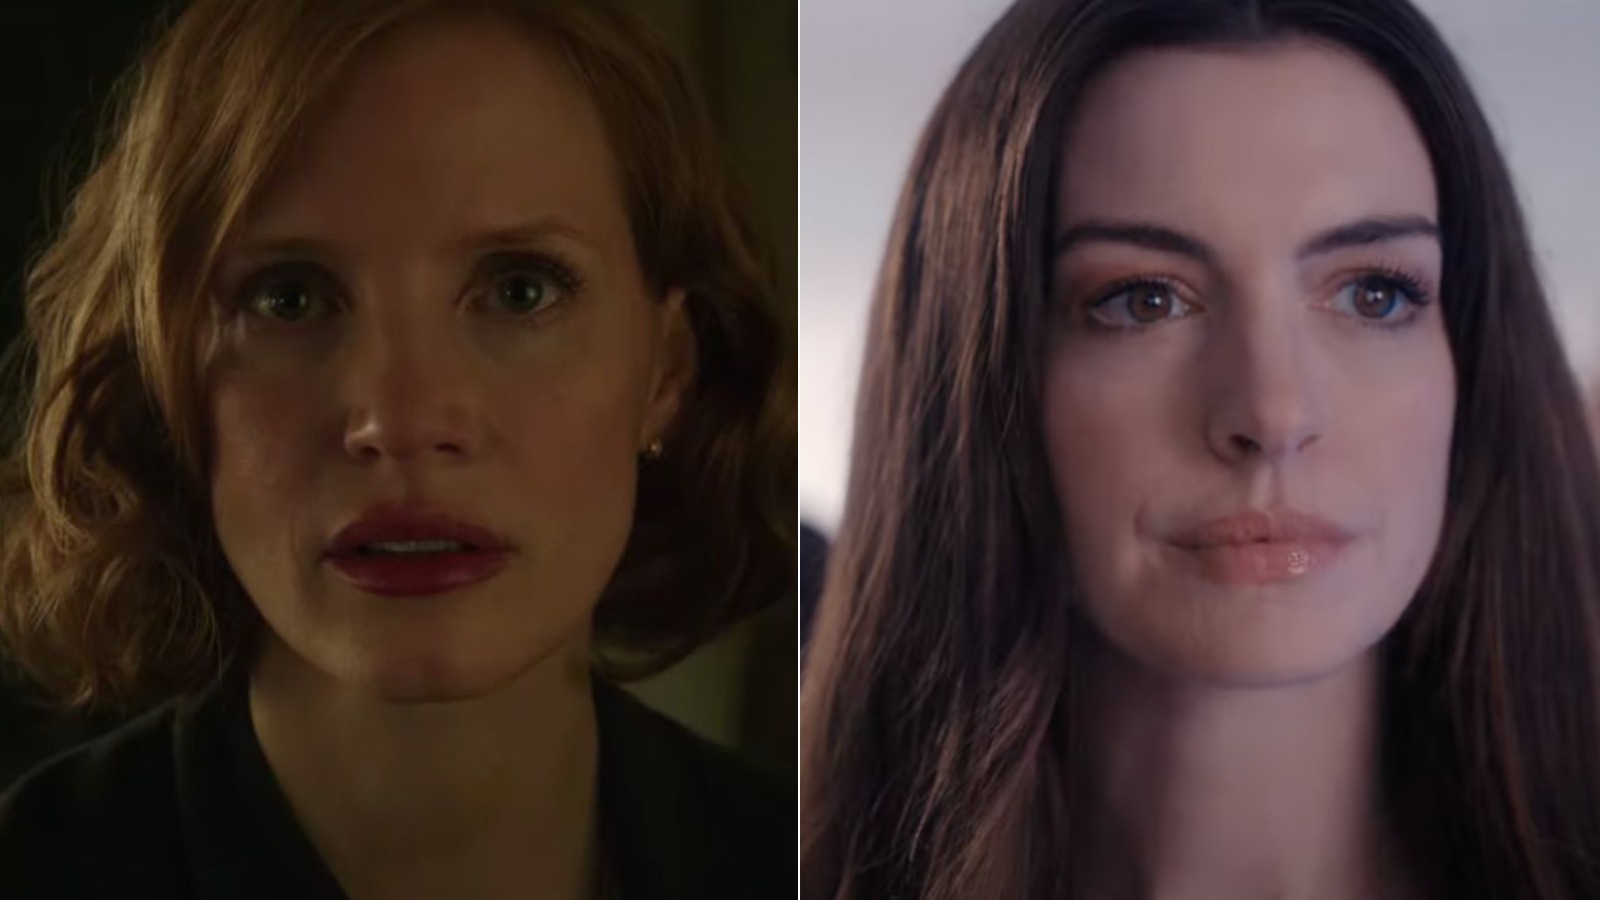 Jessica Chastain Porn Star - Jessica Chastain And Anne Hathaway To Co-Star In Psychological Thriller  Mothers' Instinct